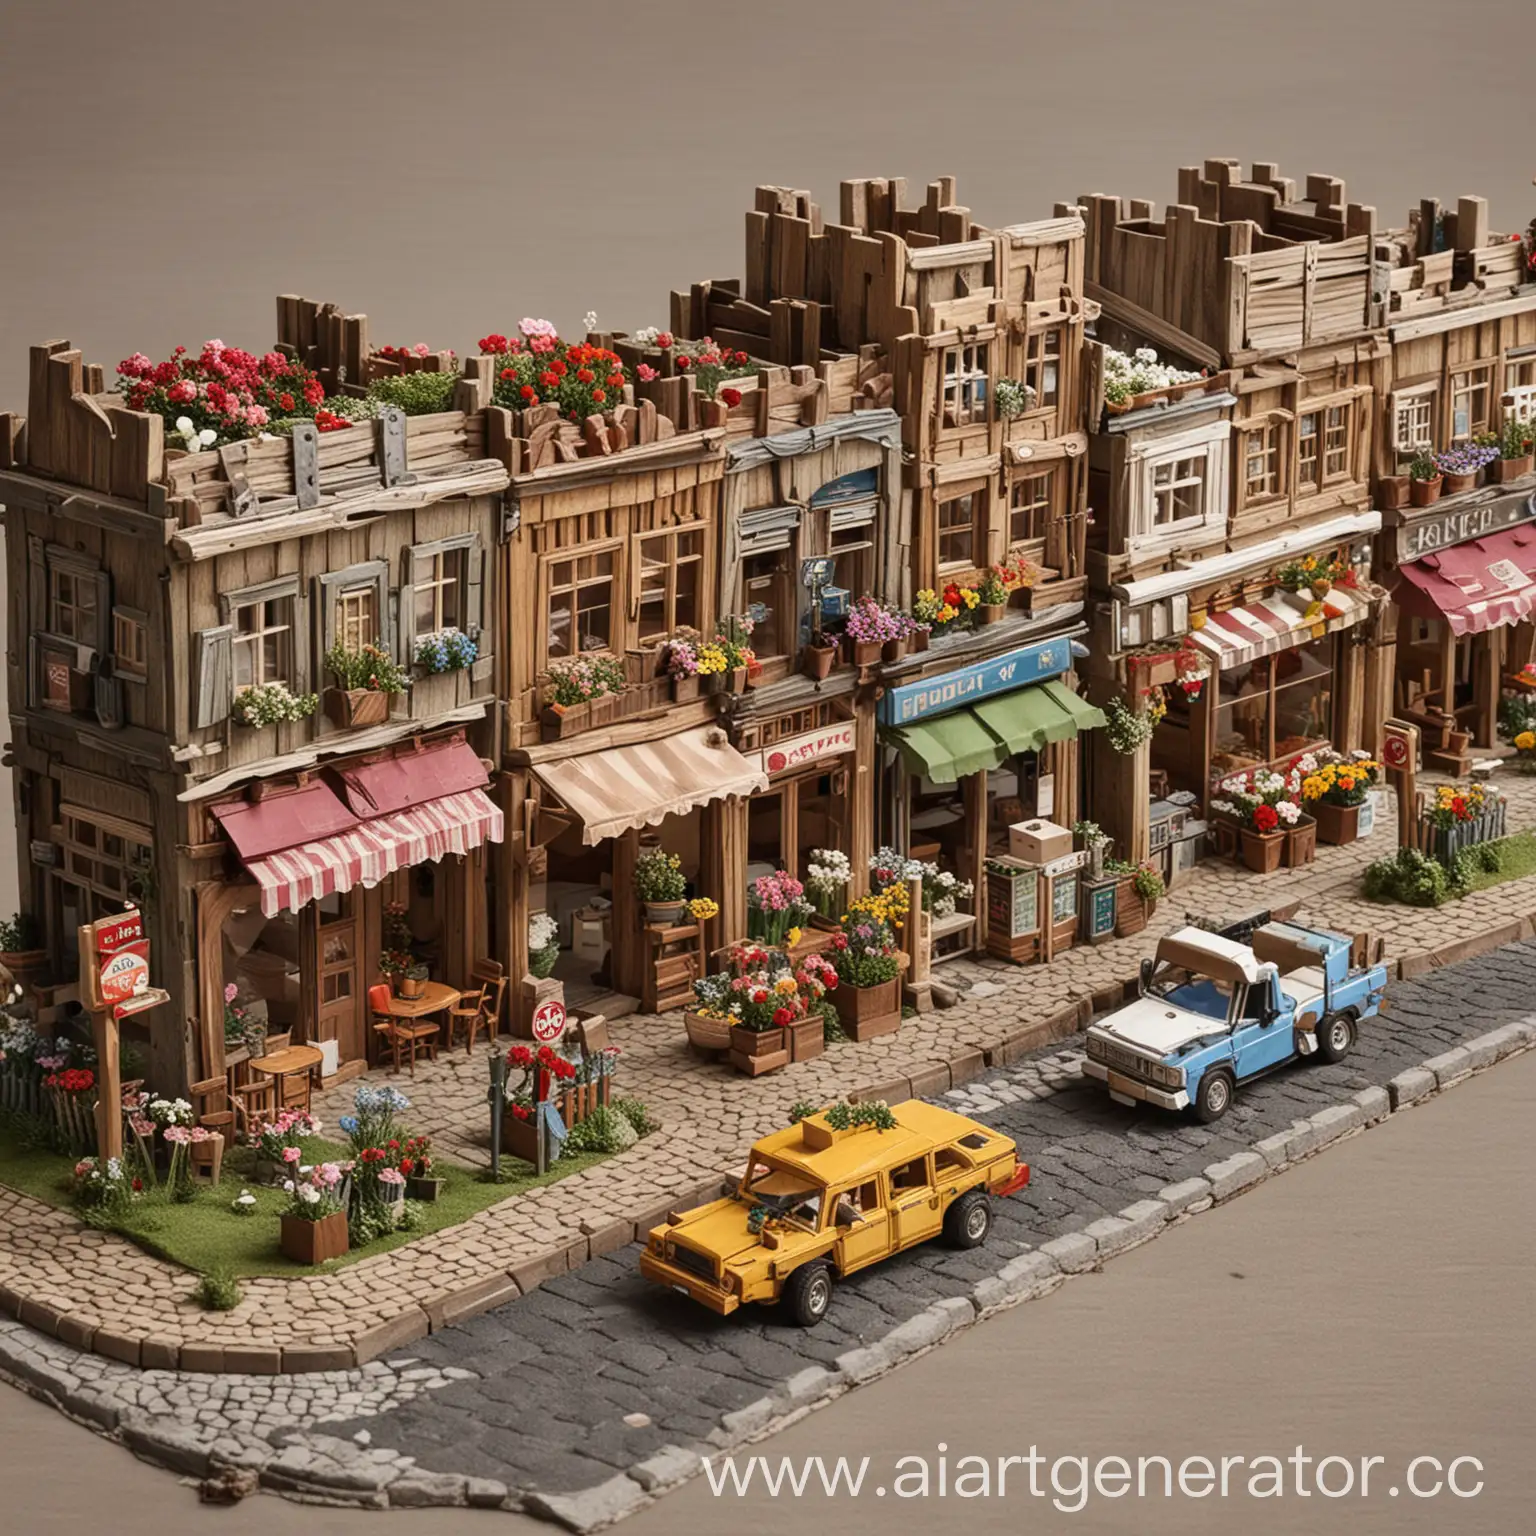 Busy-Urban-Street-Scene-with-Wooden-Cafe-and-Flower-Shops